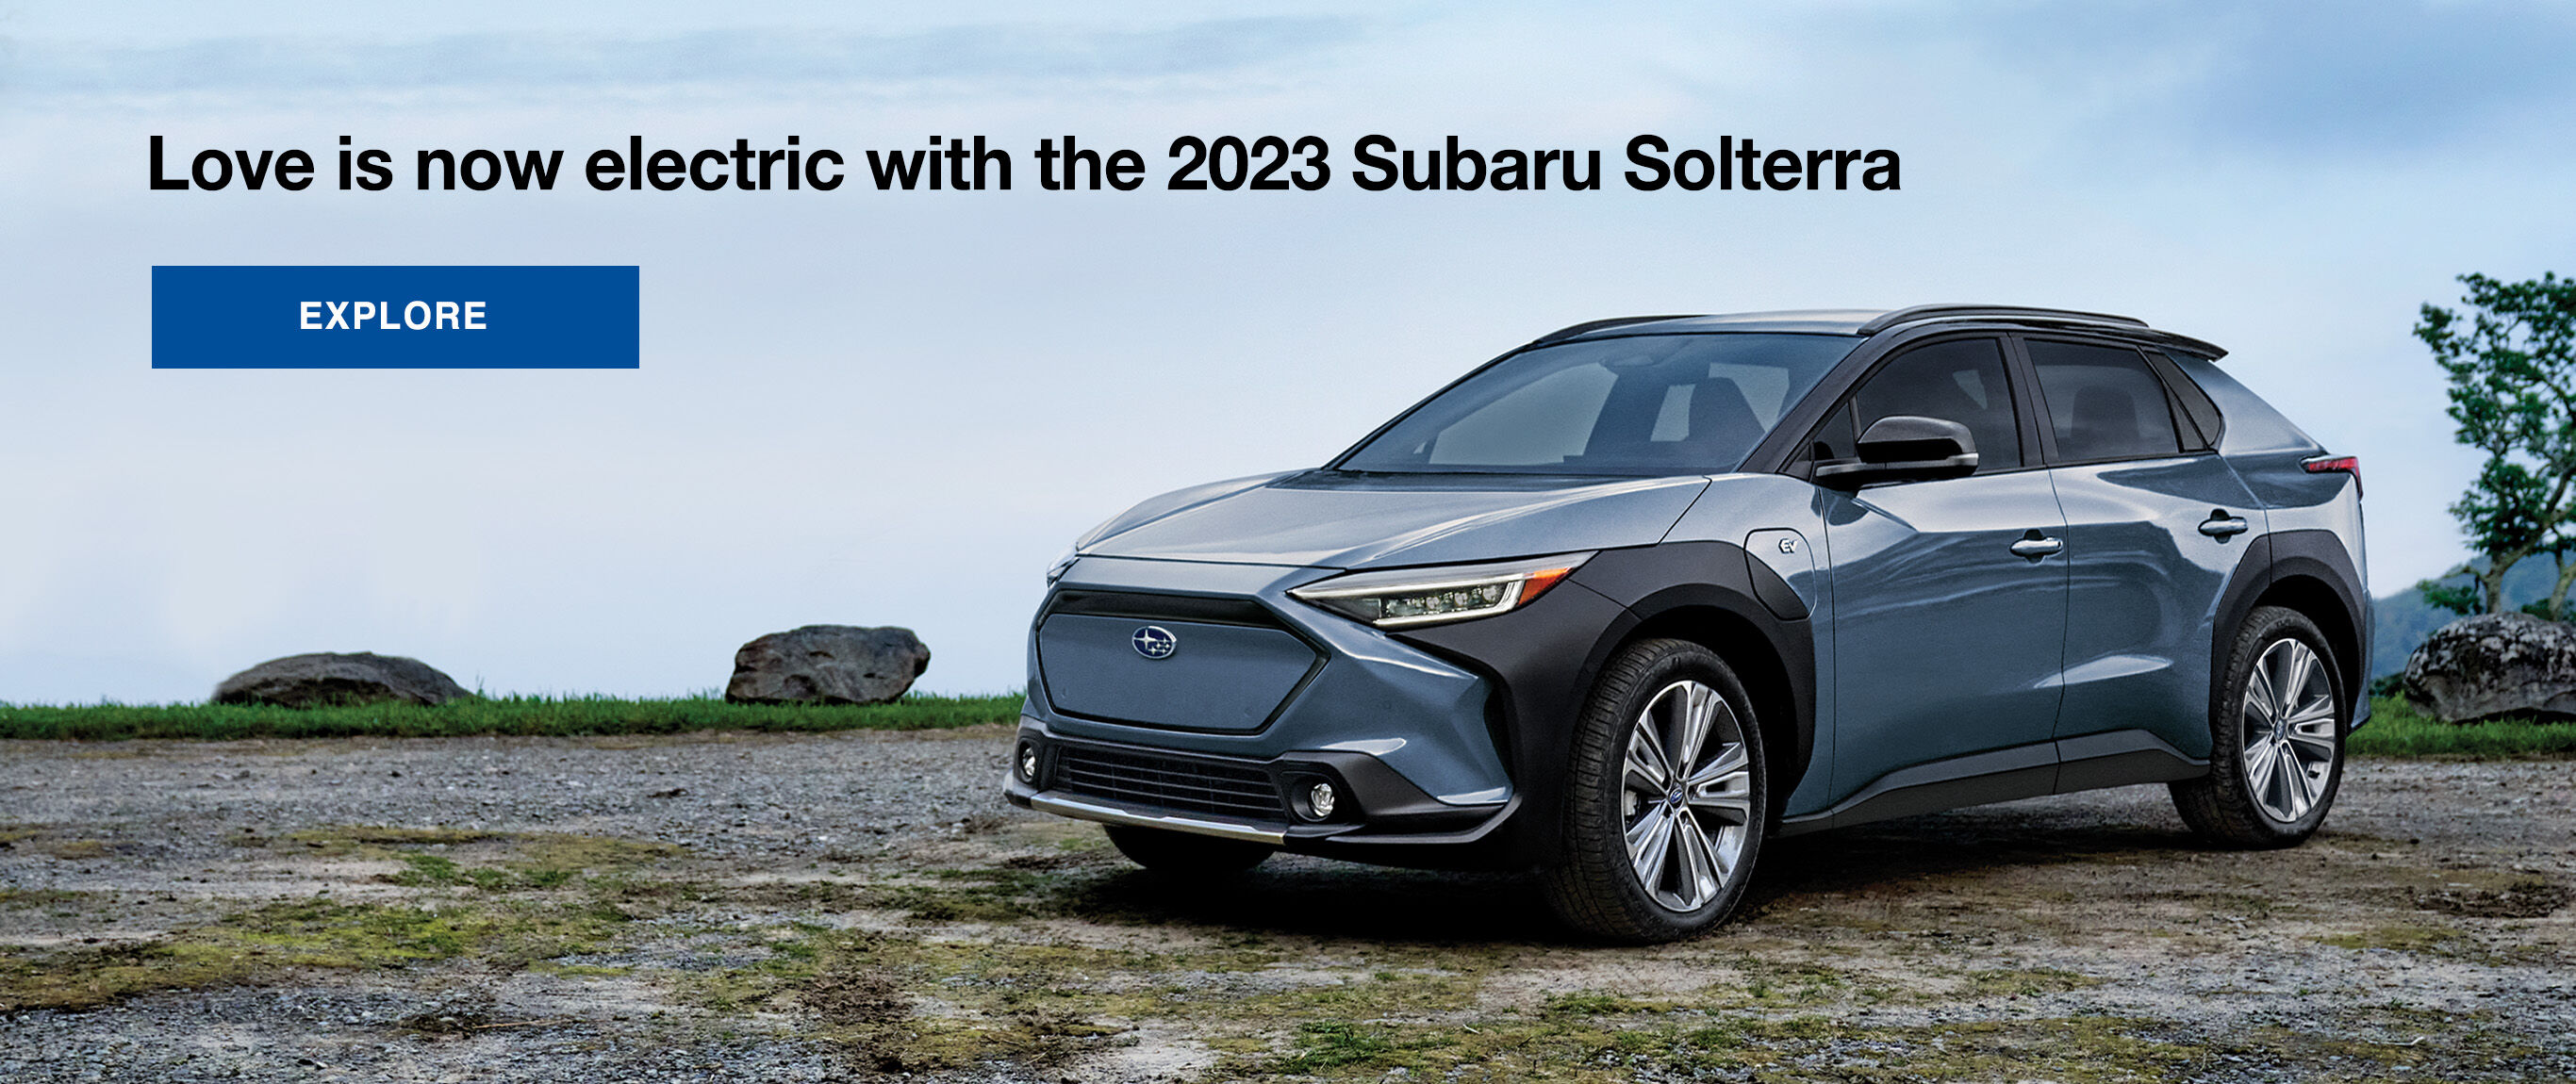 Love is now electric with the 2023 Subaru Solterra